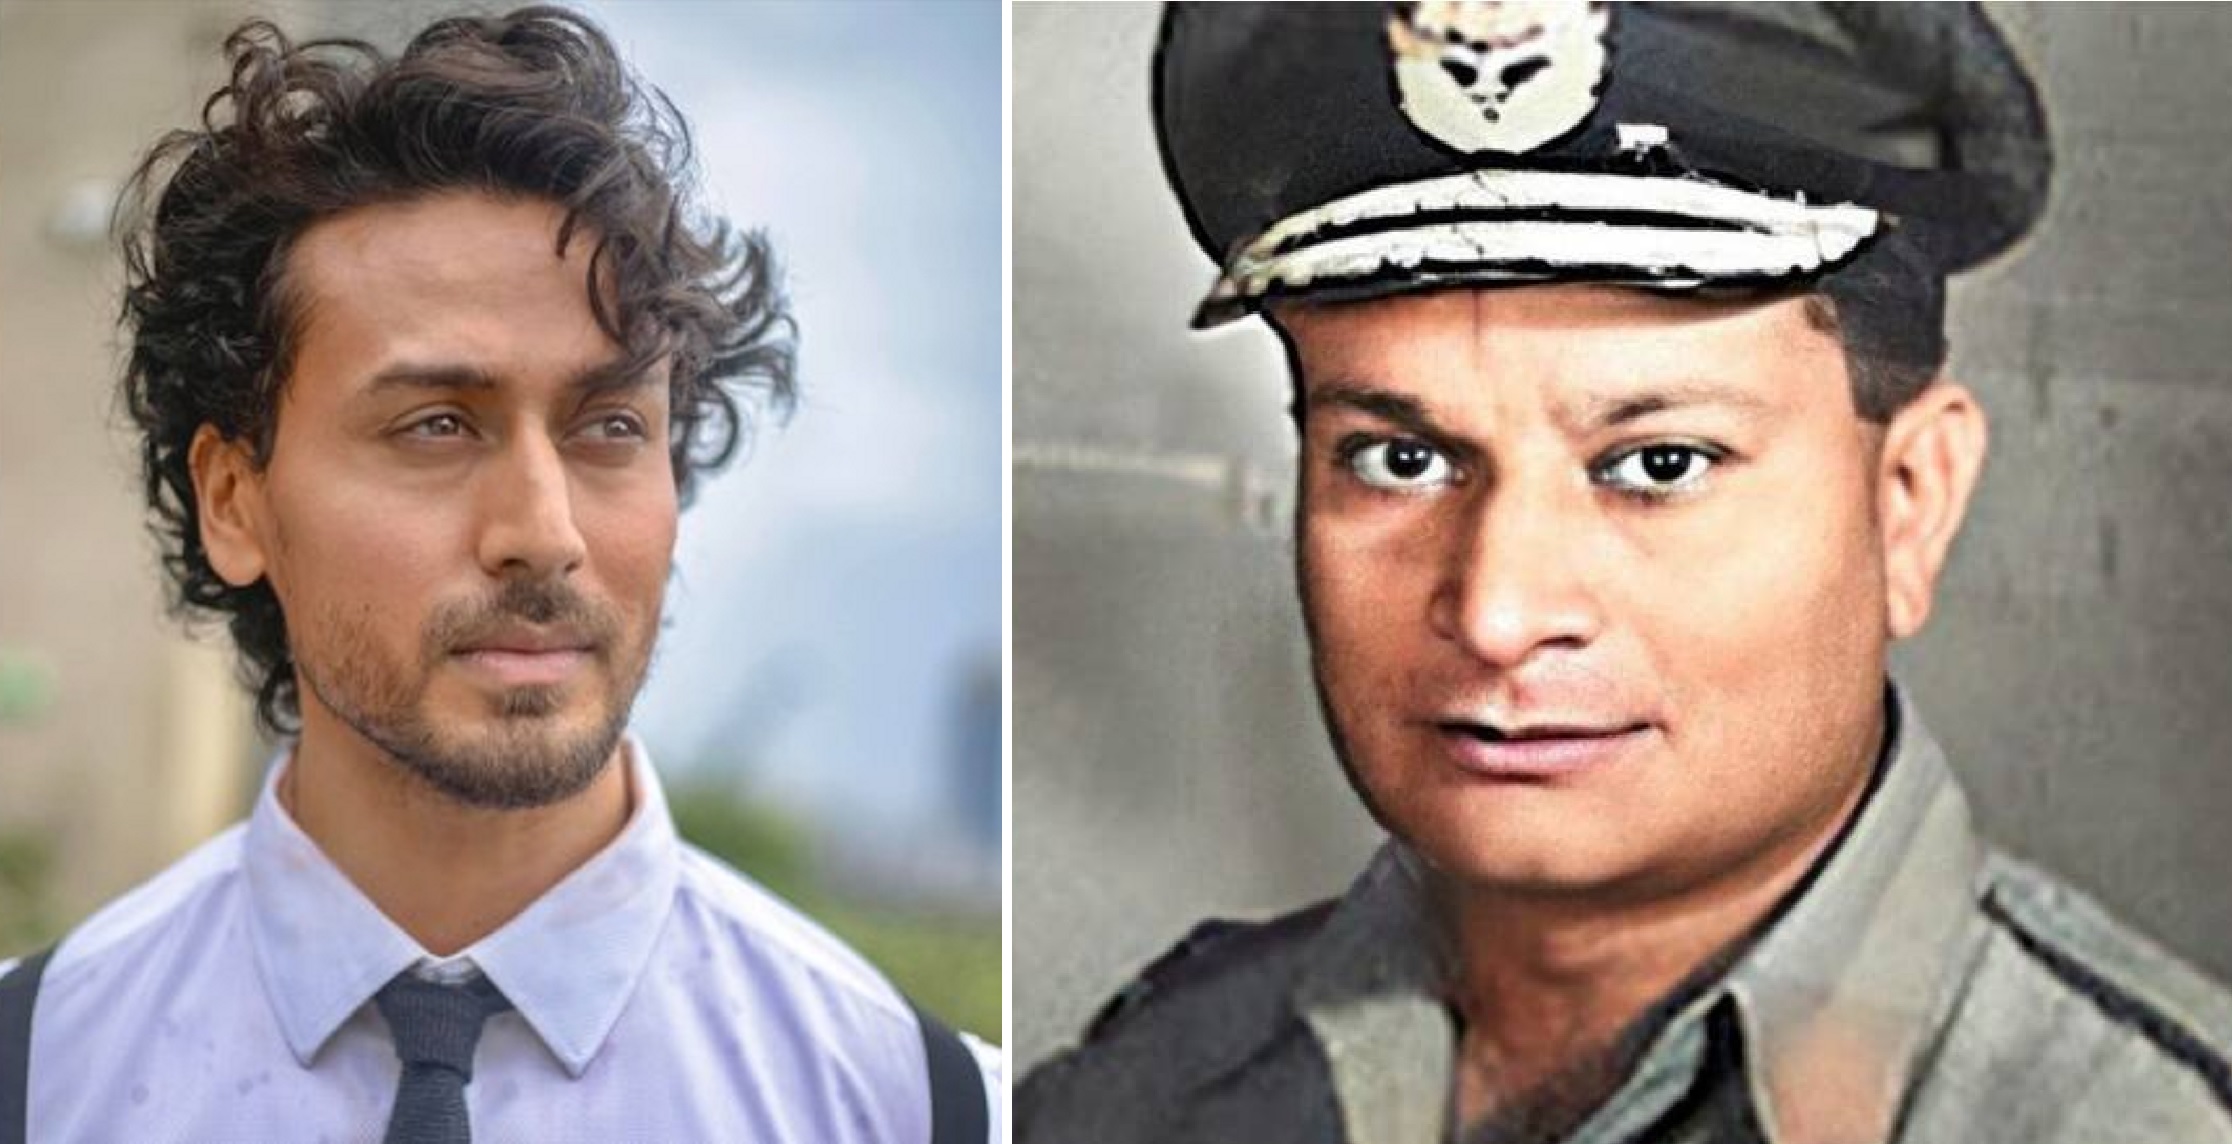 Did You Know Tiger Shroff’s Grandfather Was A Indian Air Force Pilot And Fought In World War 2?